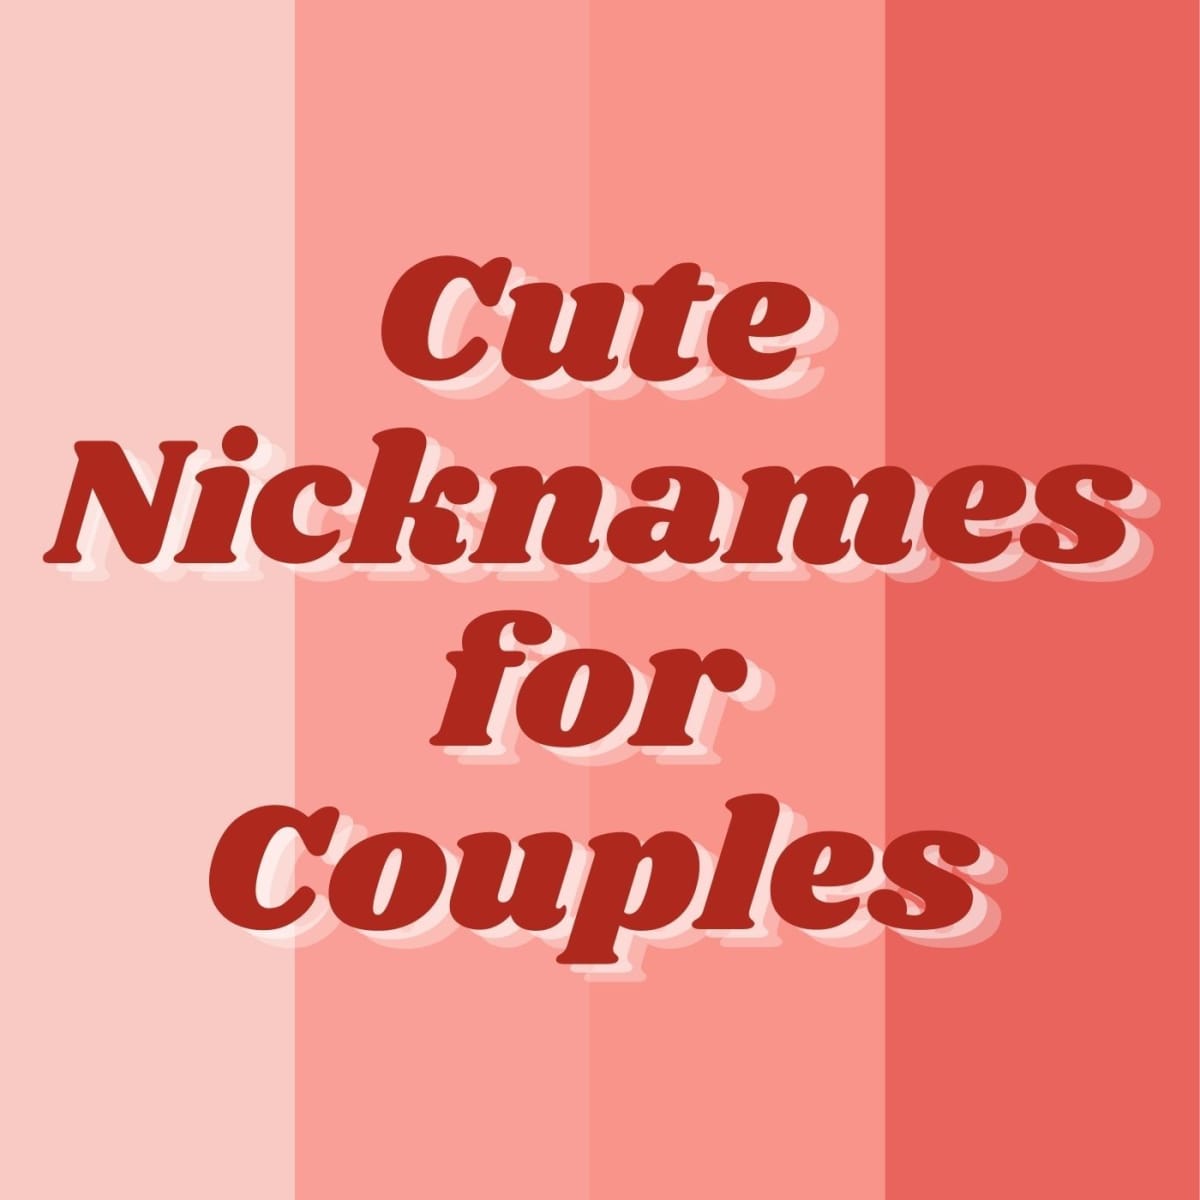 Silly names for boyfriend